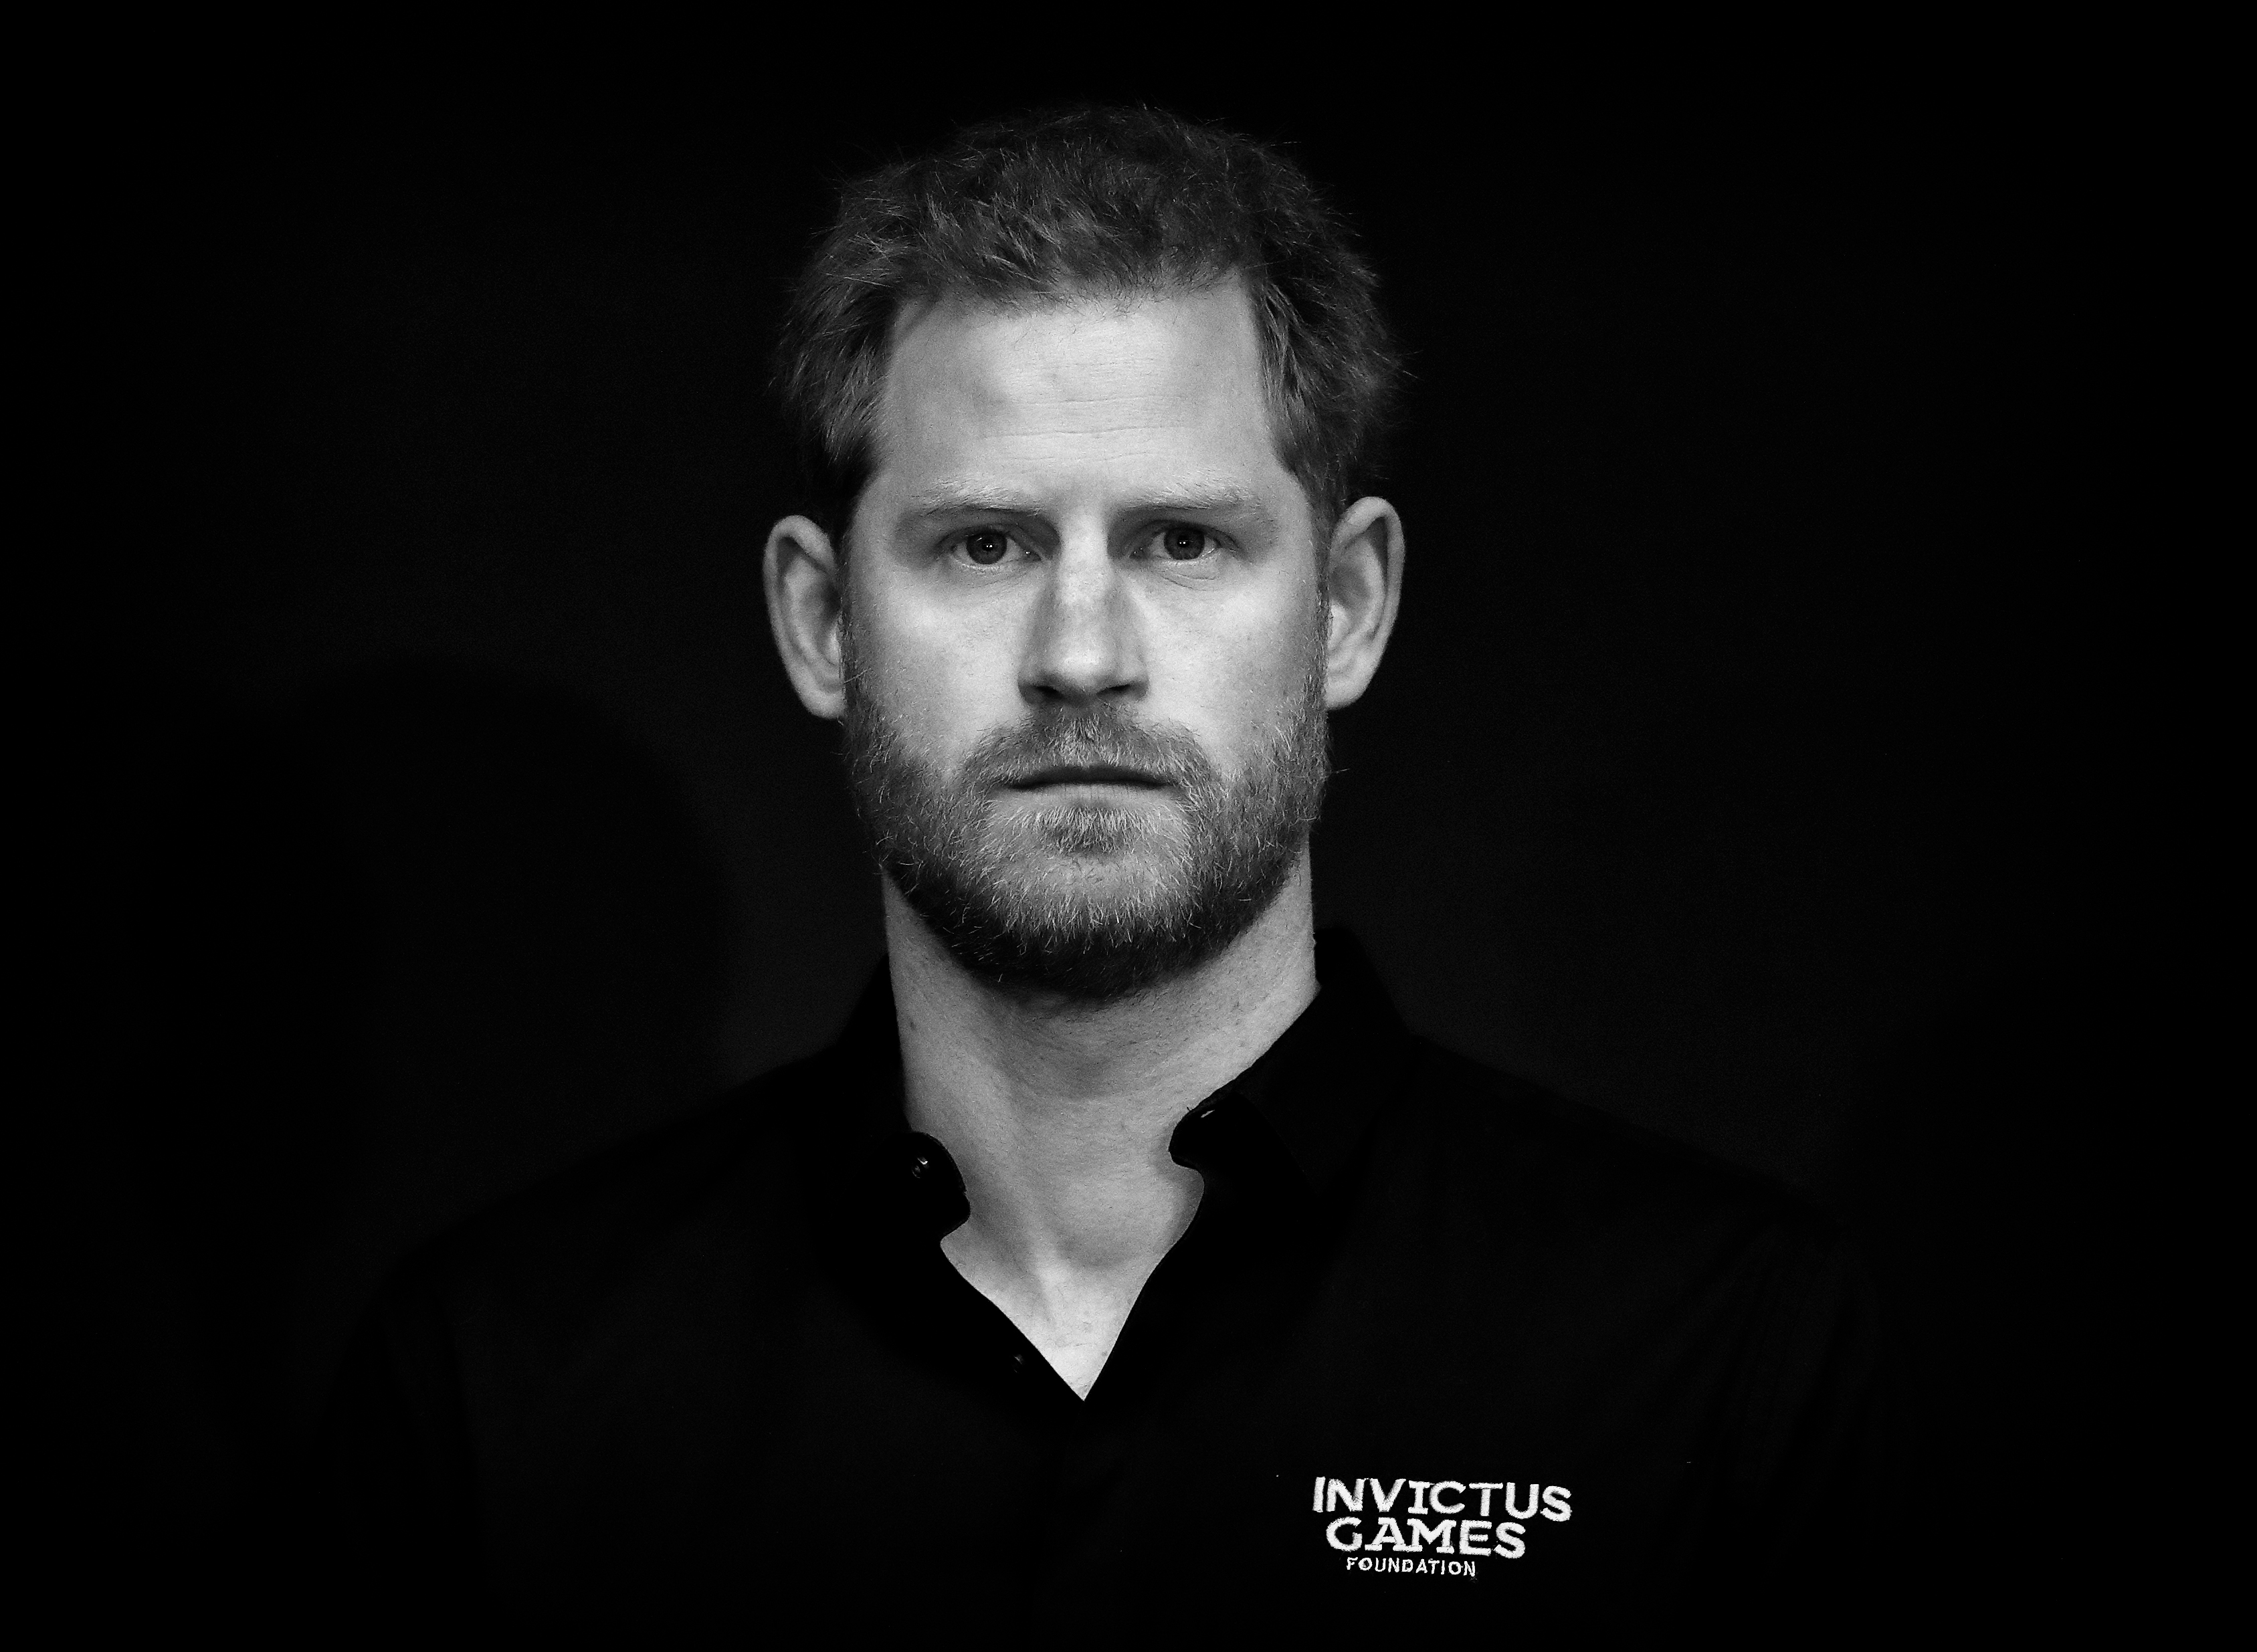 Prince Harry at the Sportcampus Zuiderpark to mark the official launch of the Invictus Games The Hague 2020 on May 9, 2019 in The Hague, Netherlands | Source: Getty Images